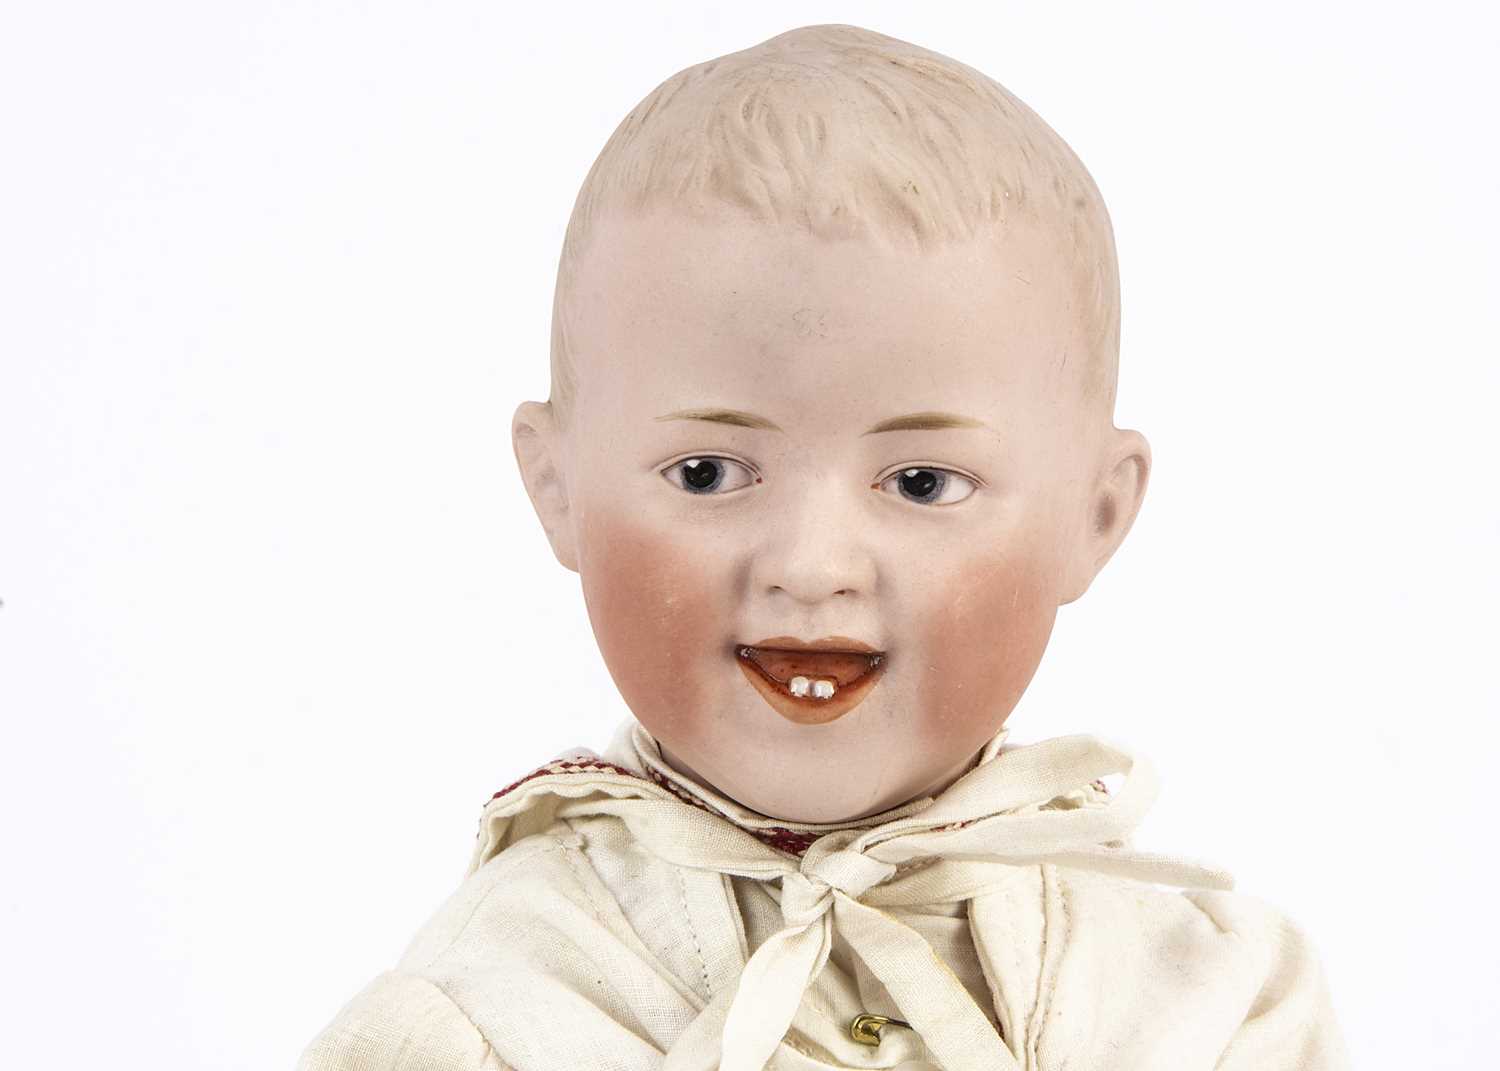 A Gebruder Heubach character laughing boy doll,